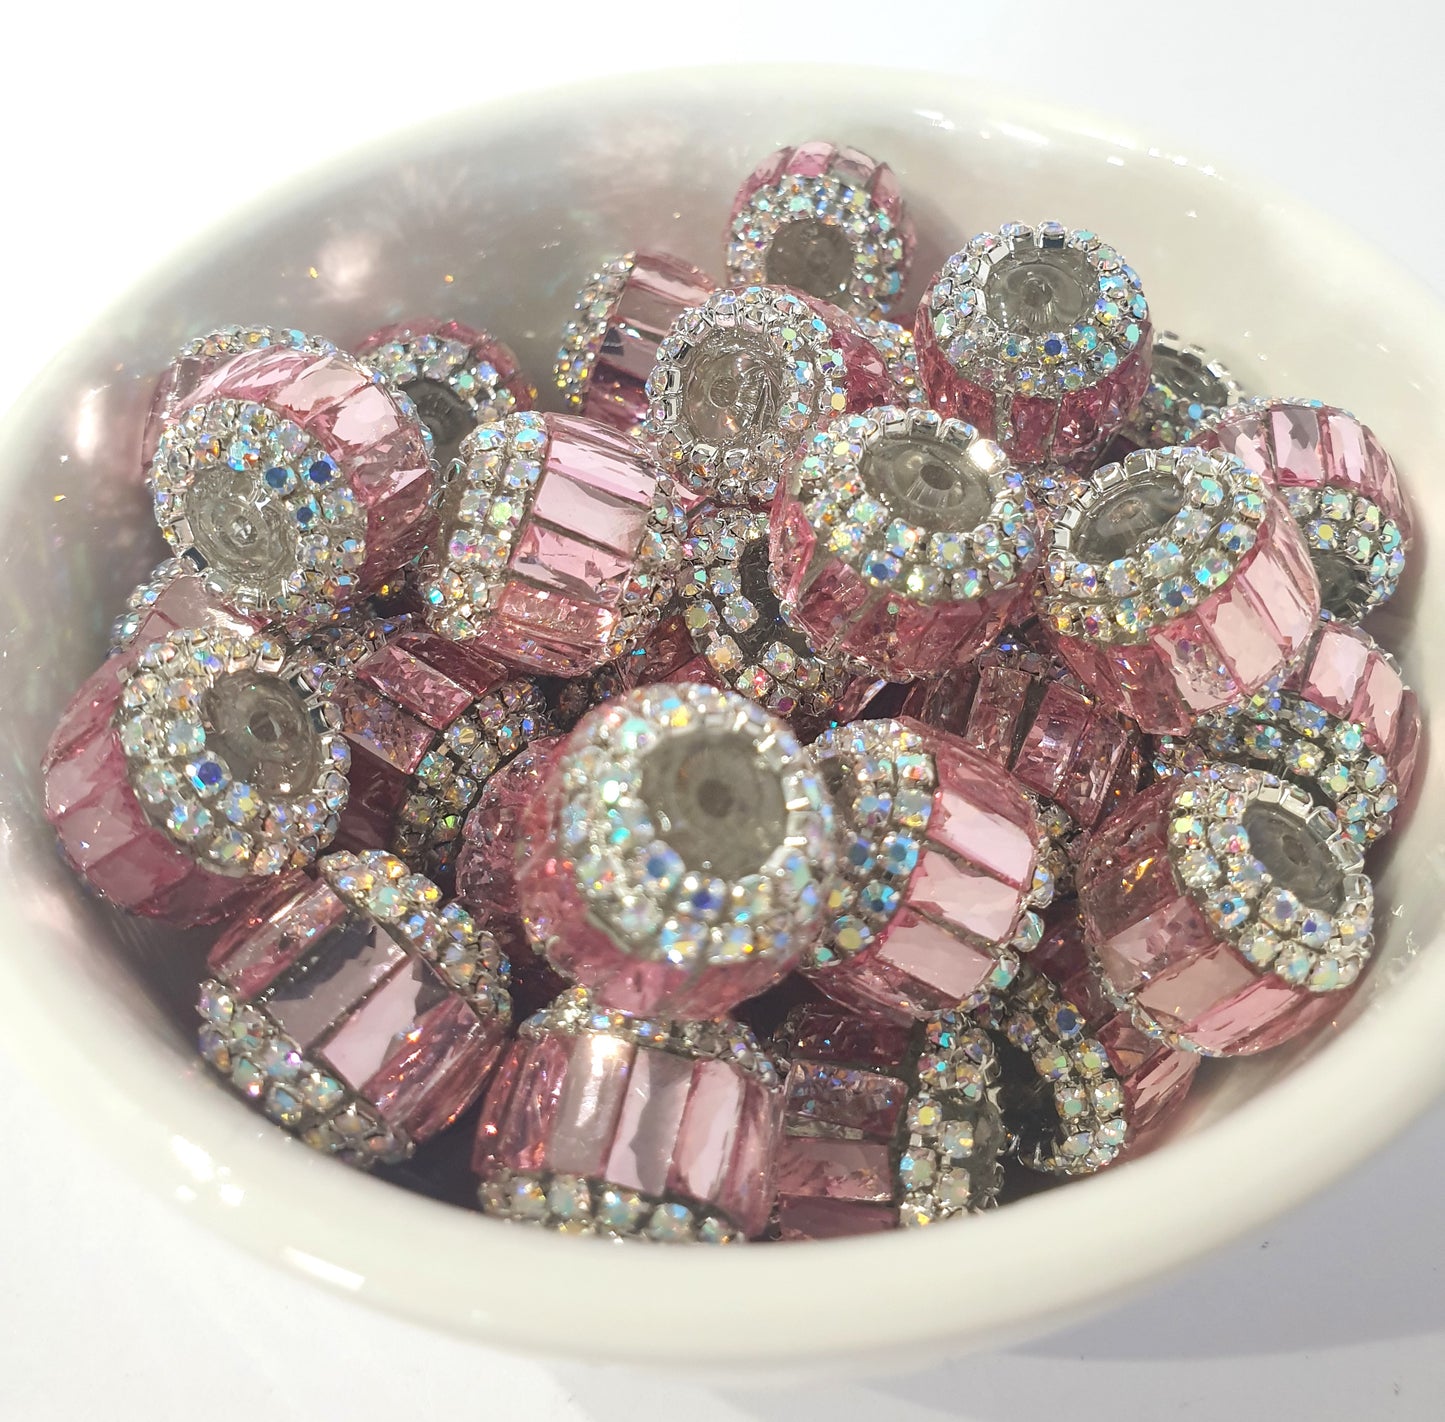 Fancy Pink Crystal Jewel 18mm beads.  High quality.